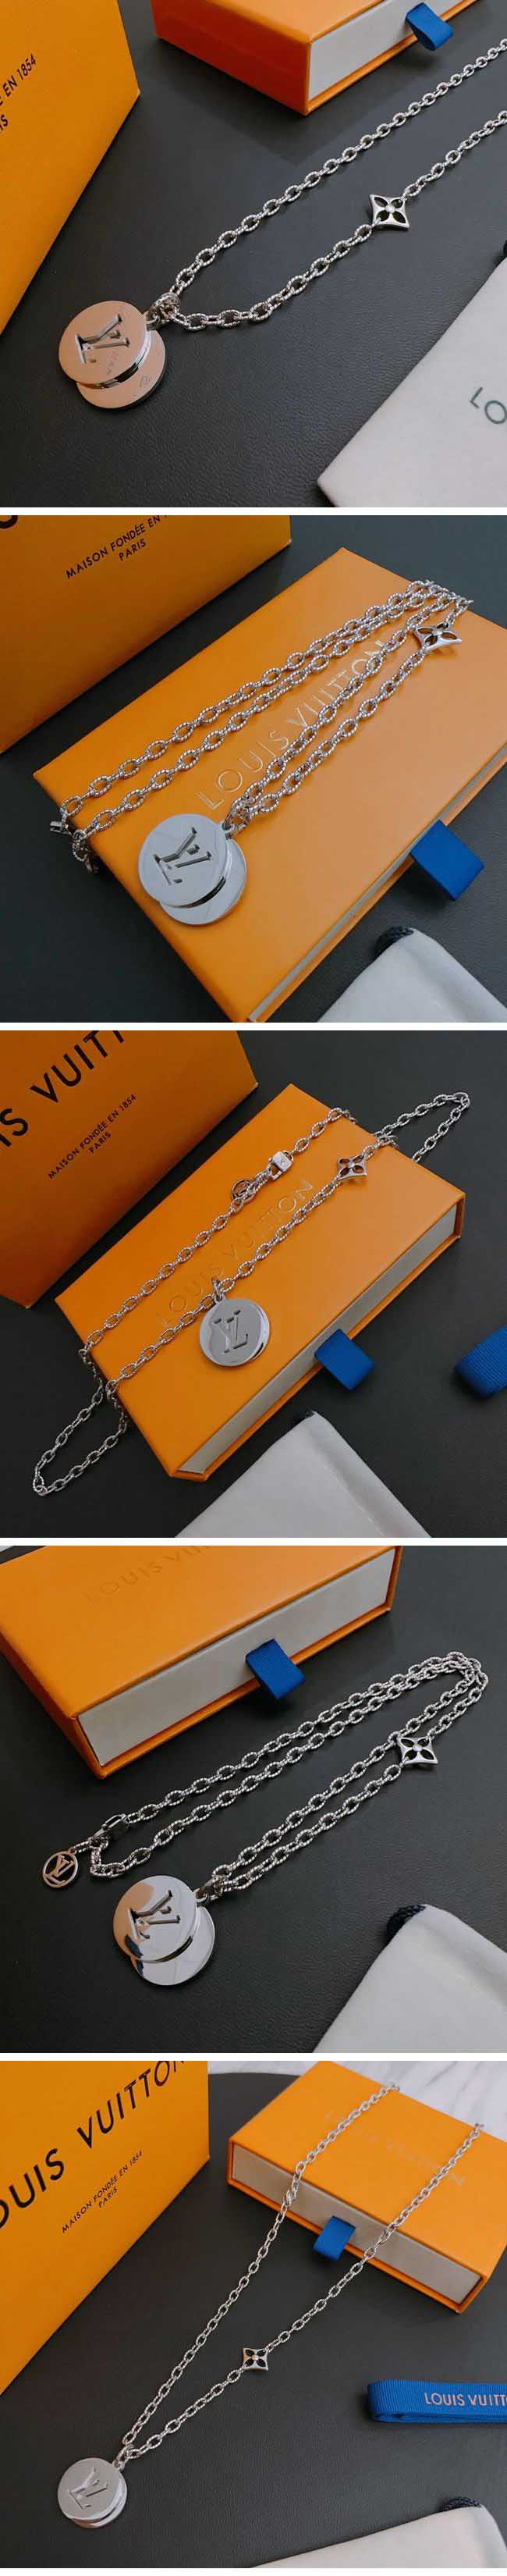 Louis Vuitton LV Double Coin Charm Necklace ルイヴィトン LV ダブル コイン チャーム ネックレス